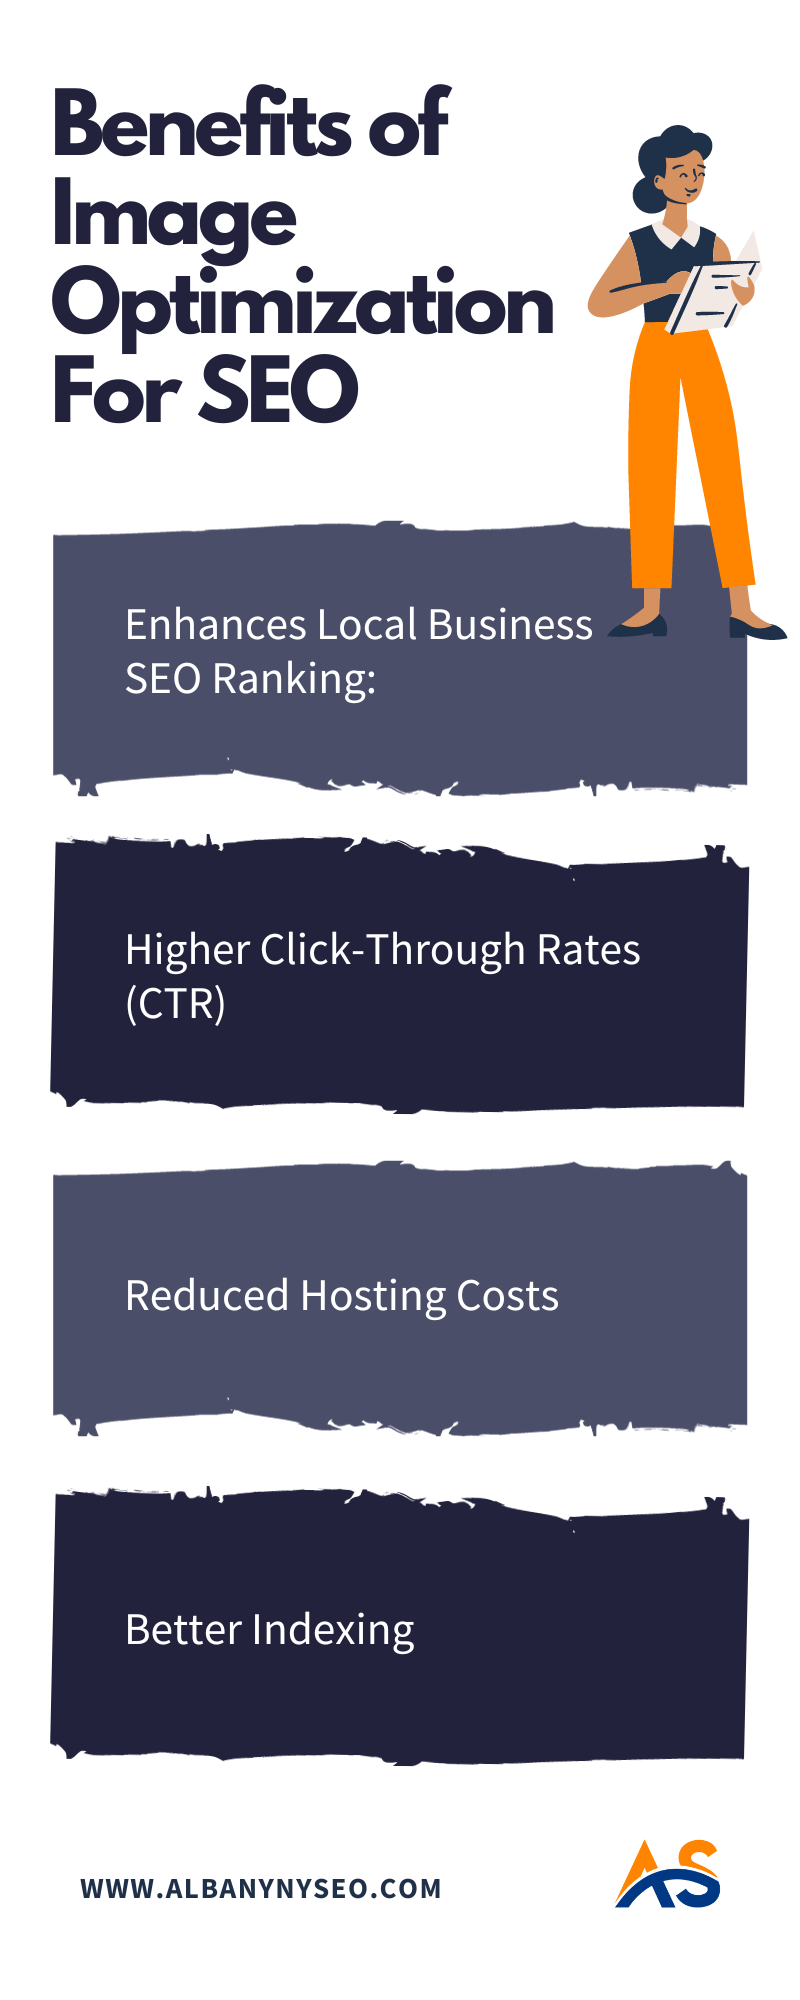 Benefits of Image Optimization for SEO - Enhances Local Business SEO Ranking, Higher Click-Through Rates (CTR), Reduced Hosting Costs, Better Indexing.